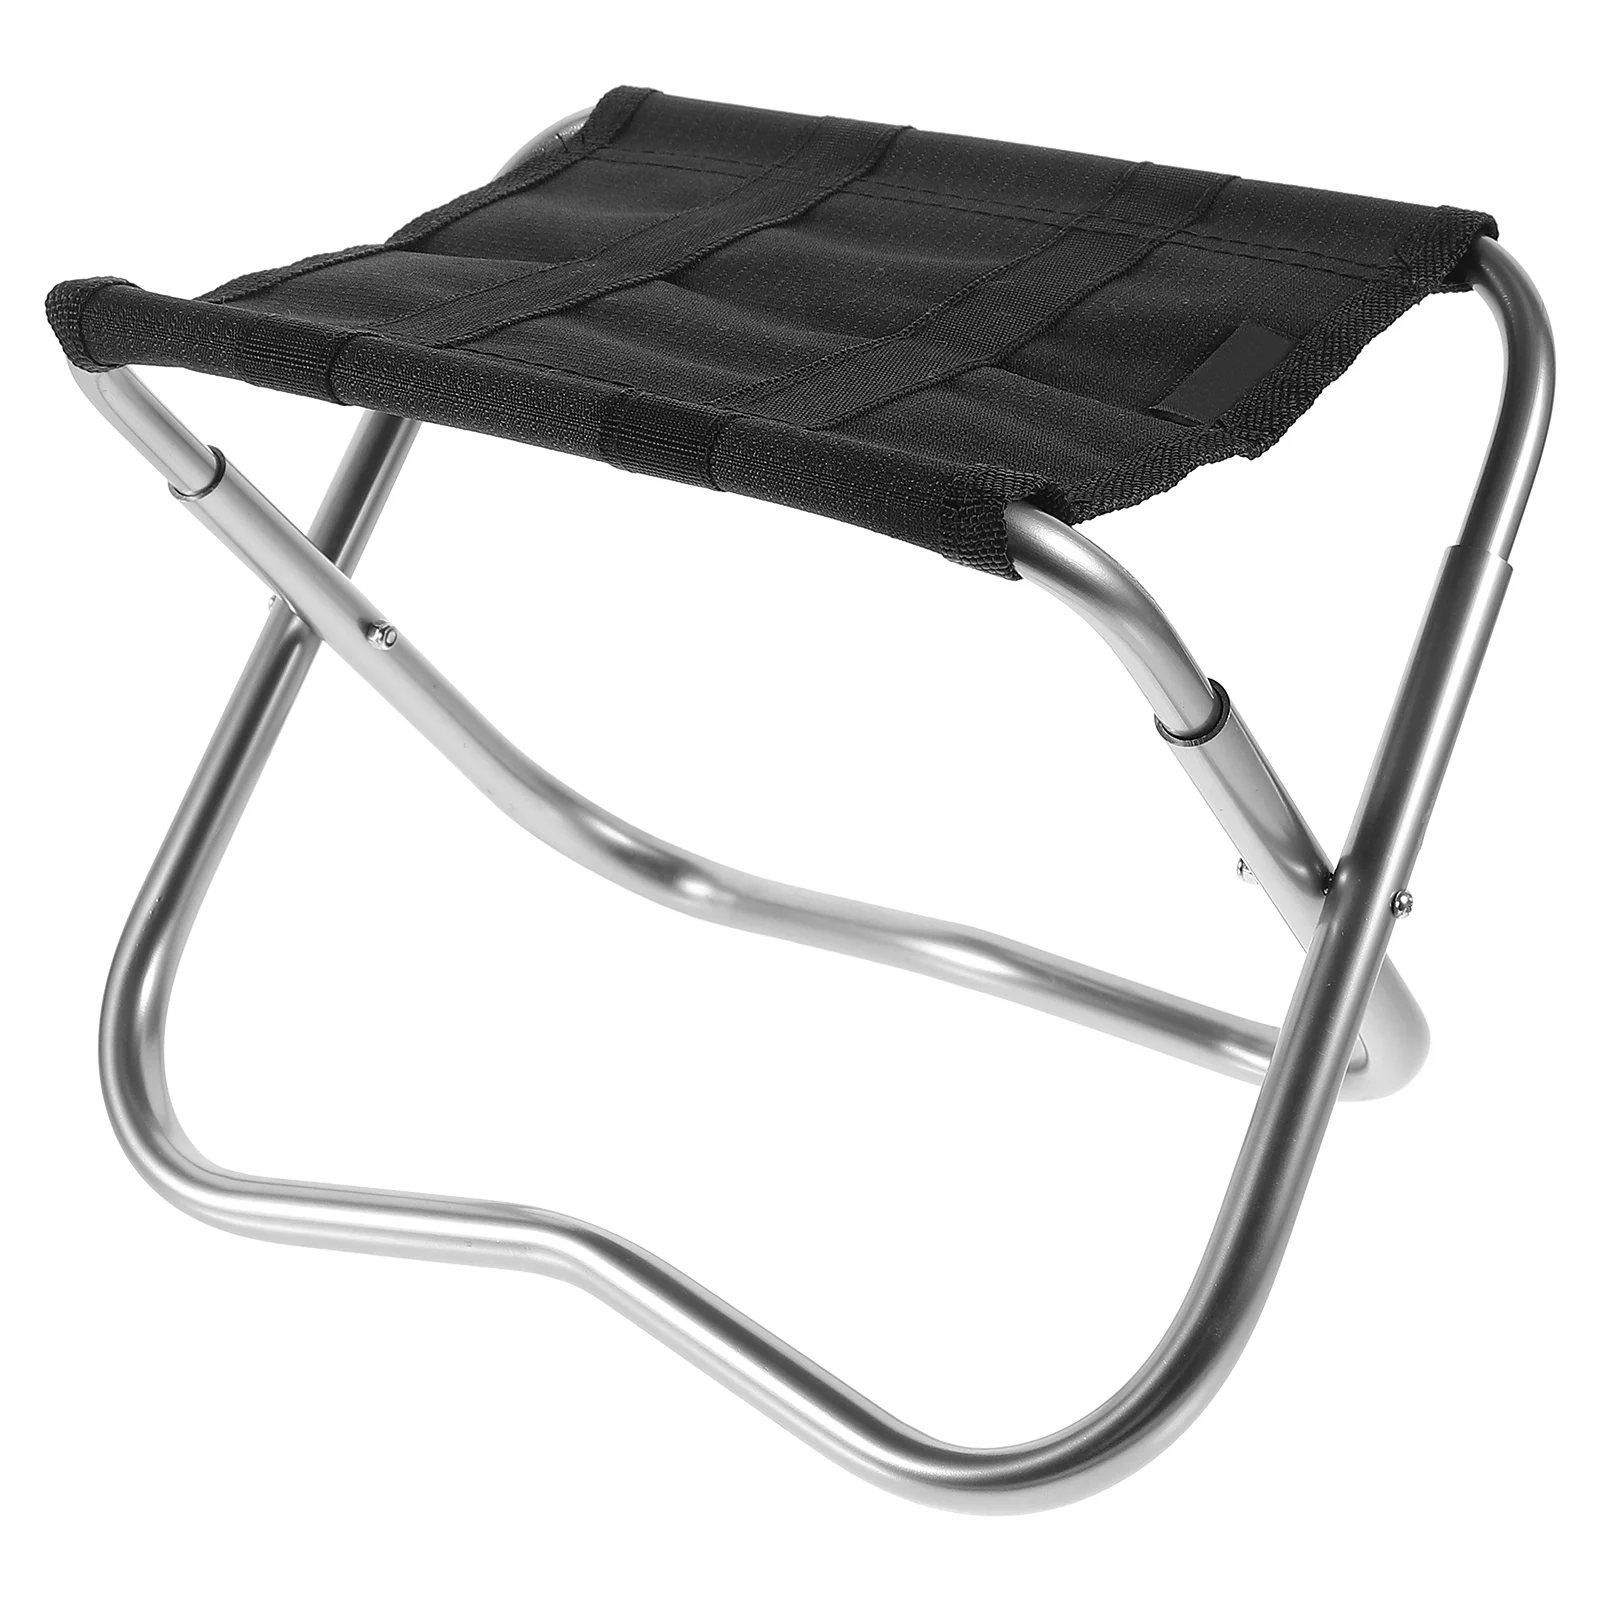 

Outdoor Fishing Stool Folding Chair Portable Fishing Chair Art Painting Chair Sketching Stool for Daily Use (Random Pattern)